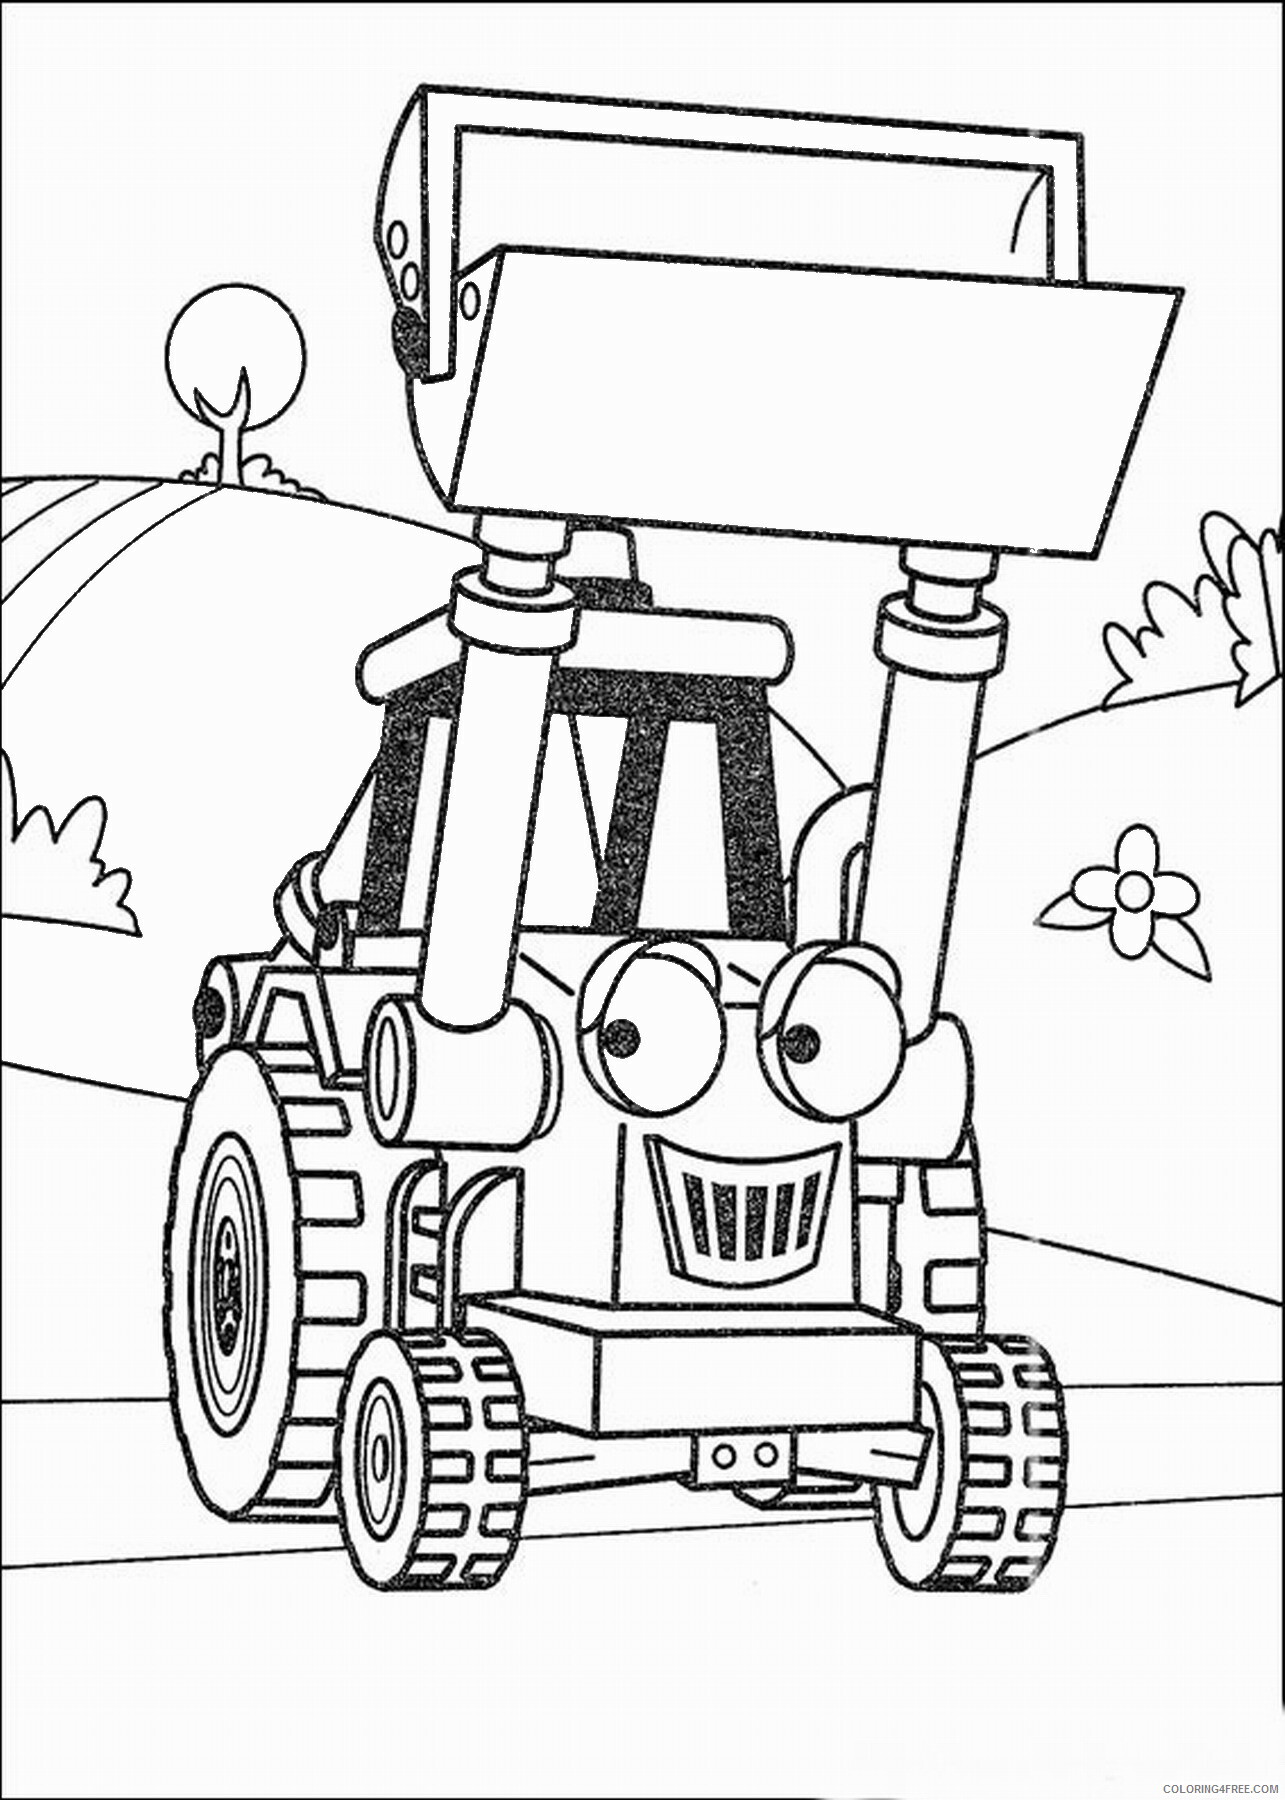 Bob the Builder Coloring Pages TV Film bob the builder_25 Printable 2020 00975 Coloring4free